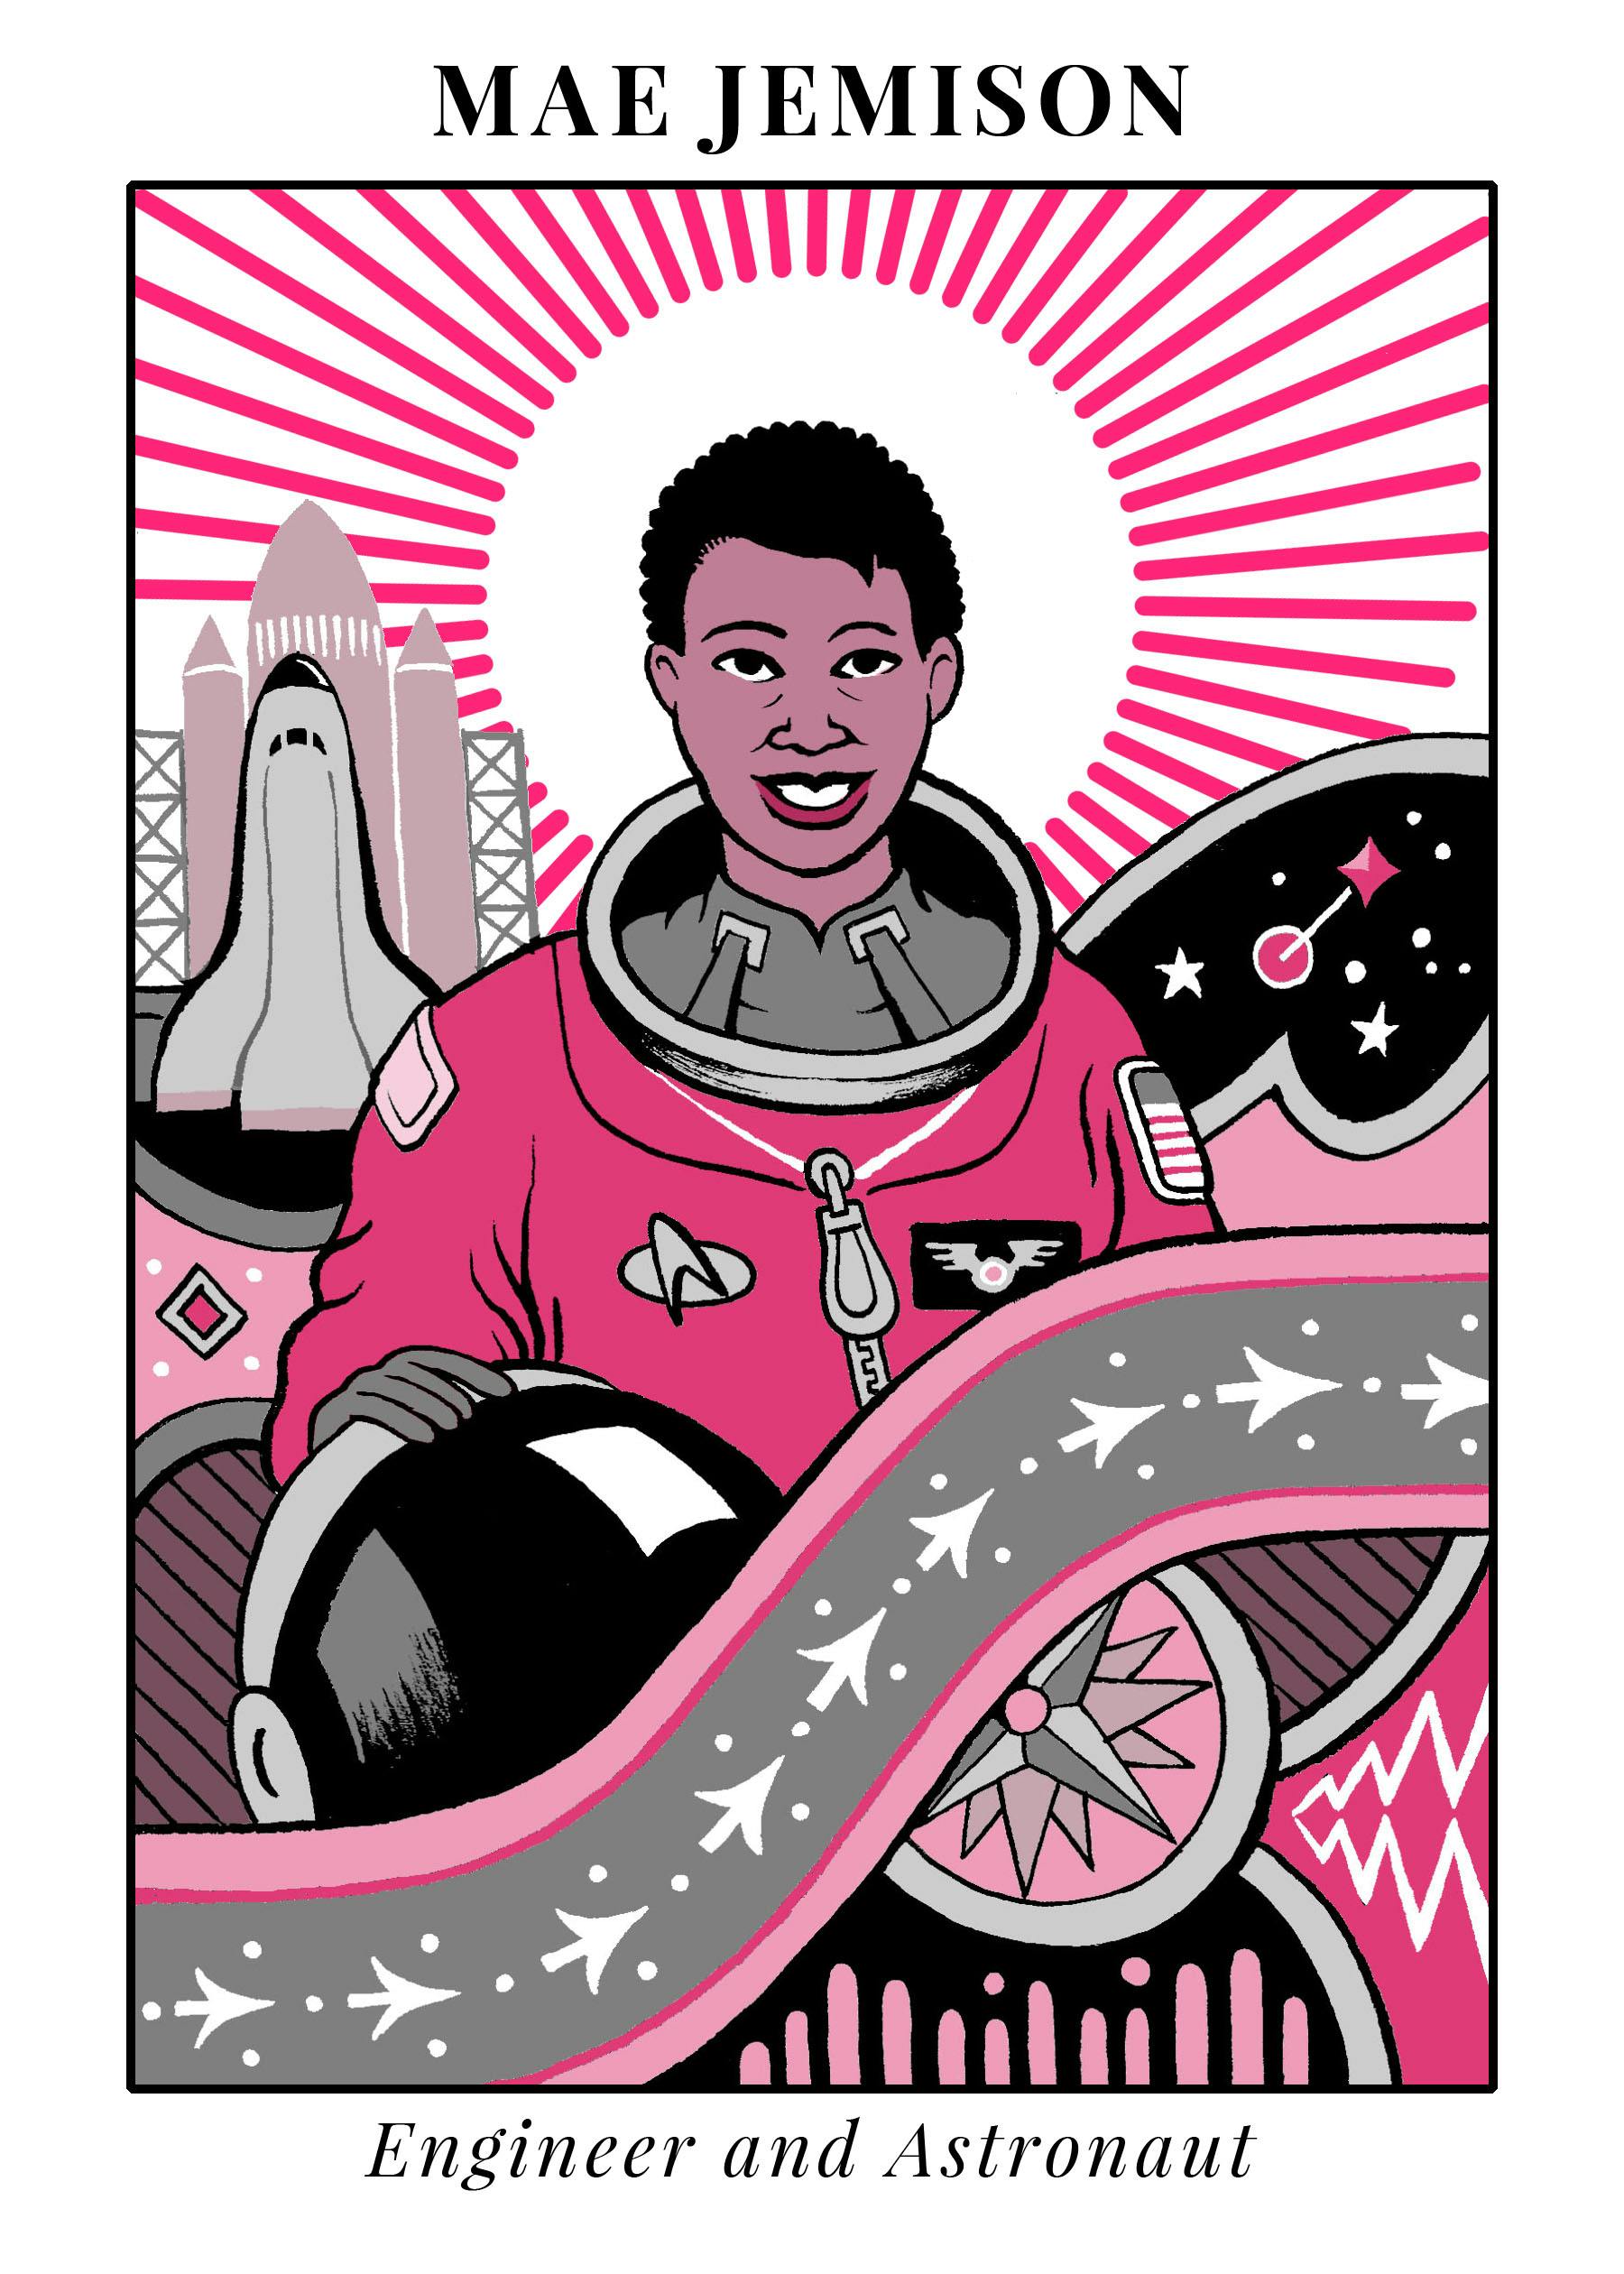 Five facts about Mae Jemison, doctor, dancer, and the first woman of color in space